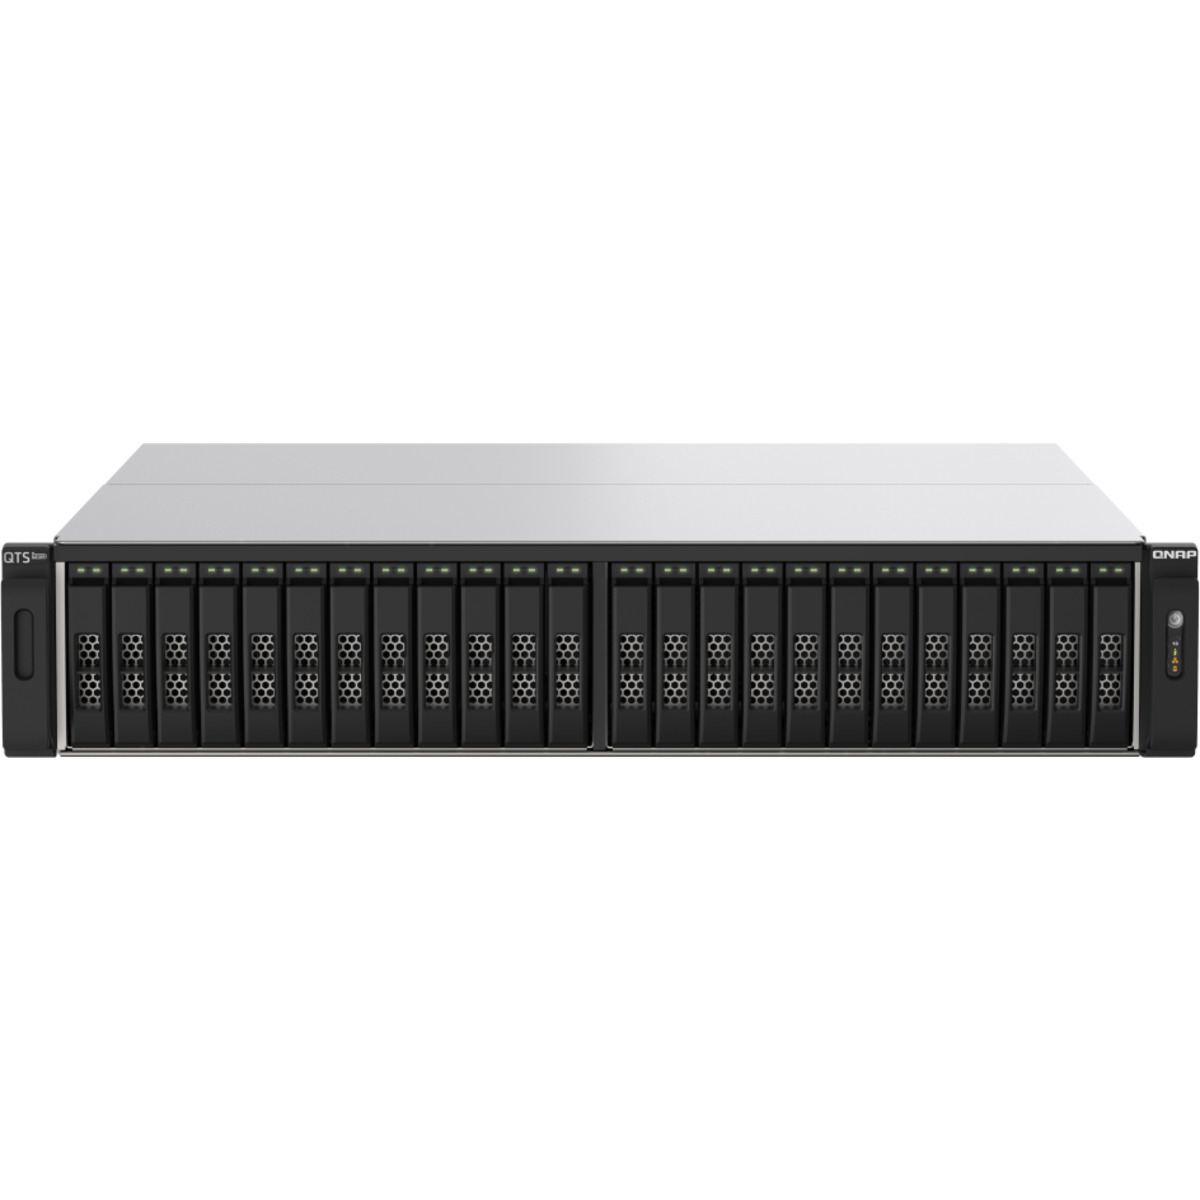 QNAP TS-h2490FU-7232P 18tb 24-Bay RackMount Large Business / Enterprise NAS - Network Attached Storage Device 18x1tb Western Digital Red SN700 WDS100T1R0C  3430/3000MB/s M.2 2280 NVMe SSD NAS Class Drives Installed - Burn-In Tested TS-h2490FU-7232P